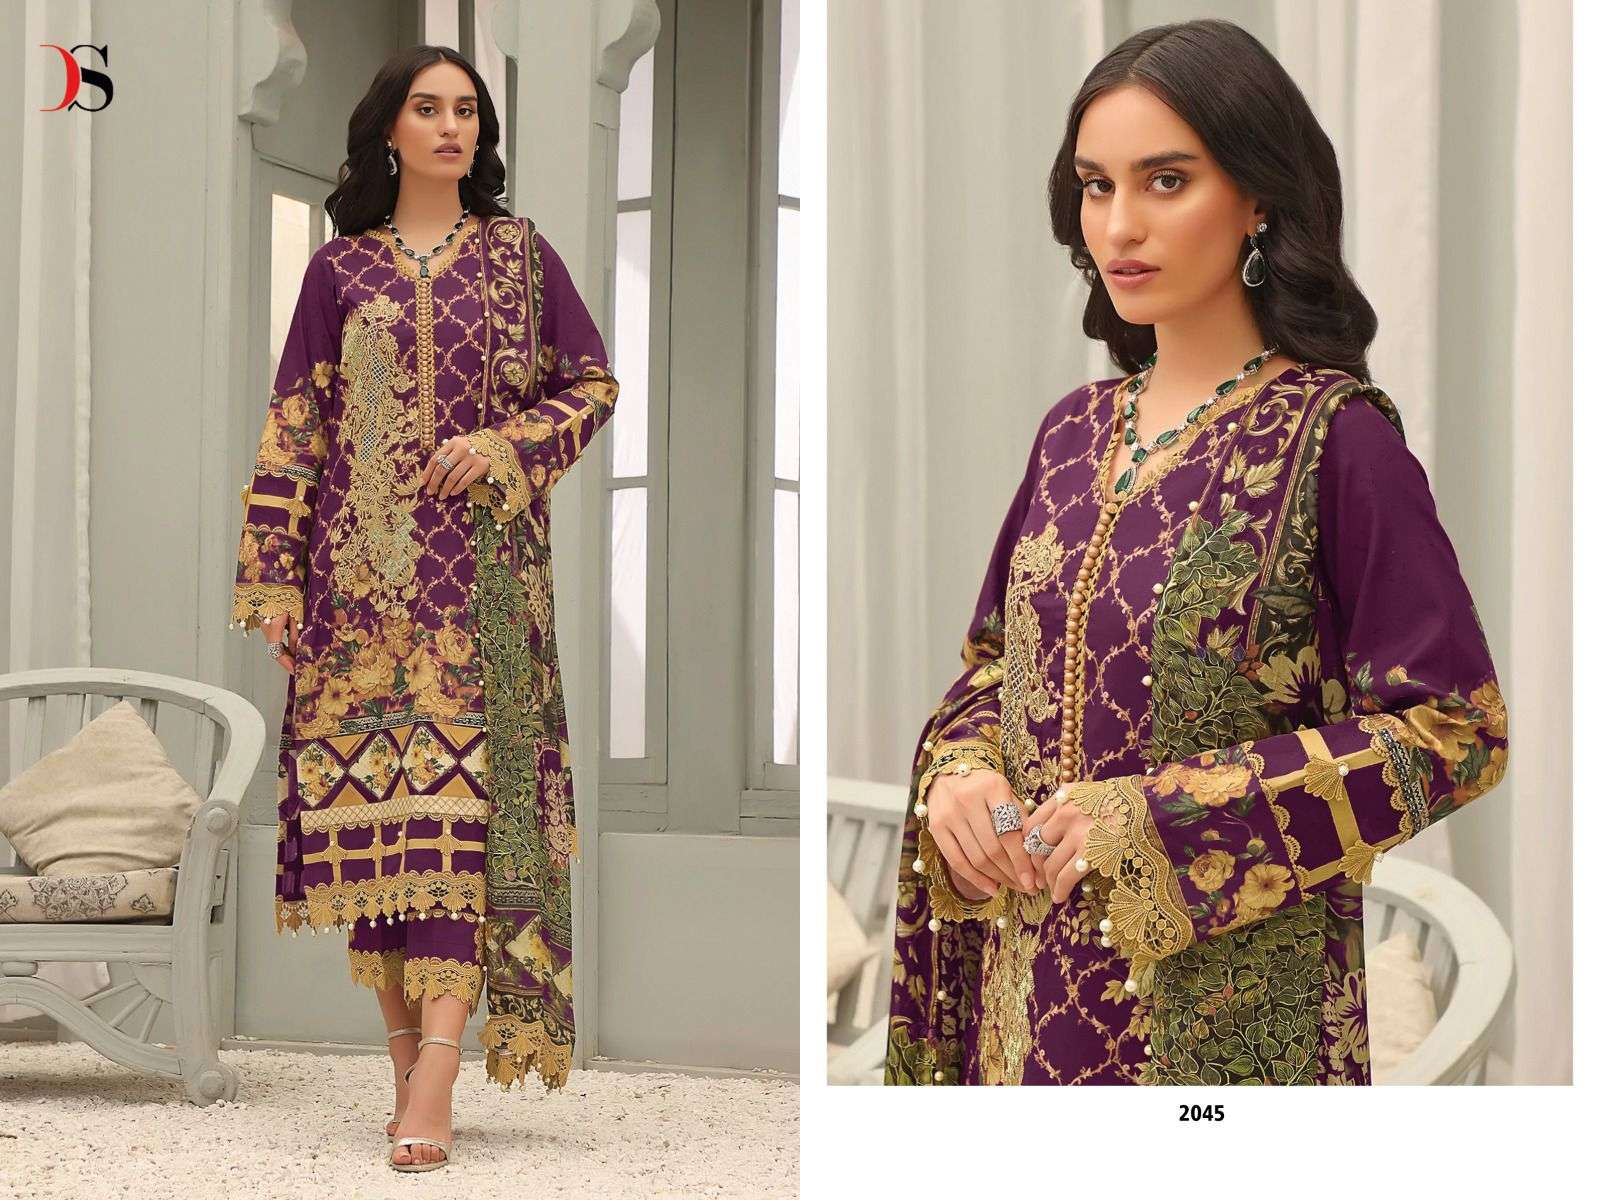 MS 21022 HEAVY COTTON EMBROIDERY WORK LATEST EXCLUSIVE CLASSY PARTY WEAR  STYLISH FASHIONABLE DESIGNER WEDDING FESTIVE SPECIAL STUNNING PAKISTANI  SUITS BEST OUTFIT SUPPLIER IN INDIA PAKISTAN UAE - Reewaz International |  Wholesaler